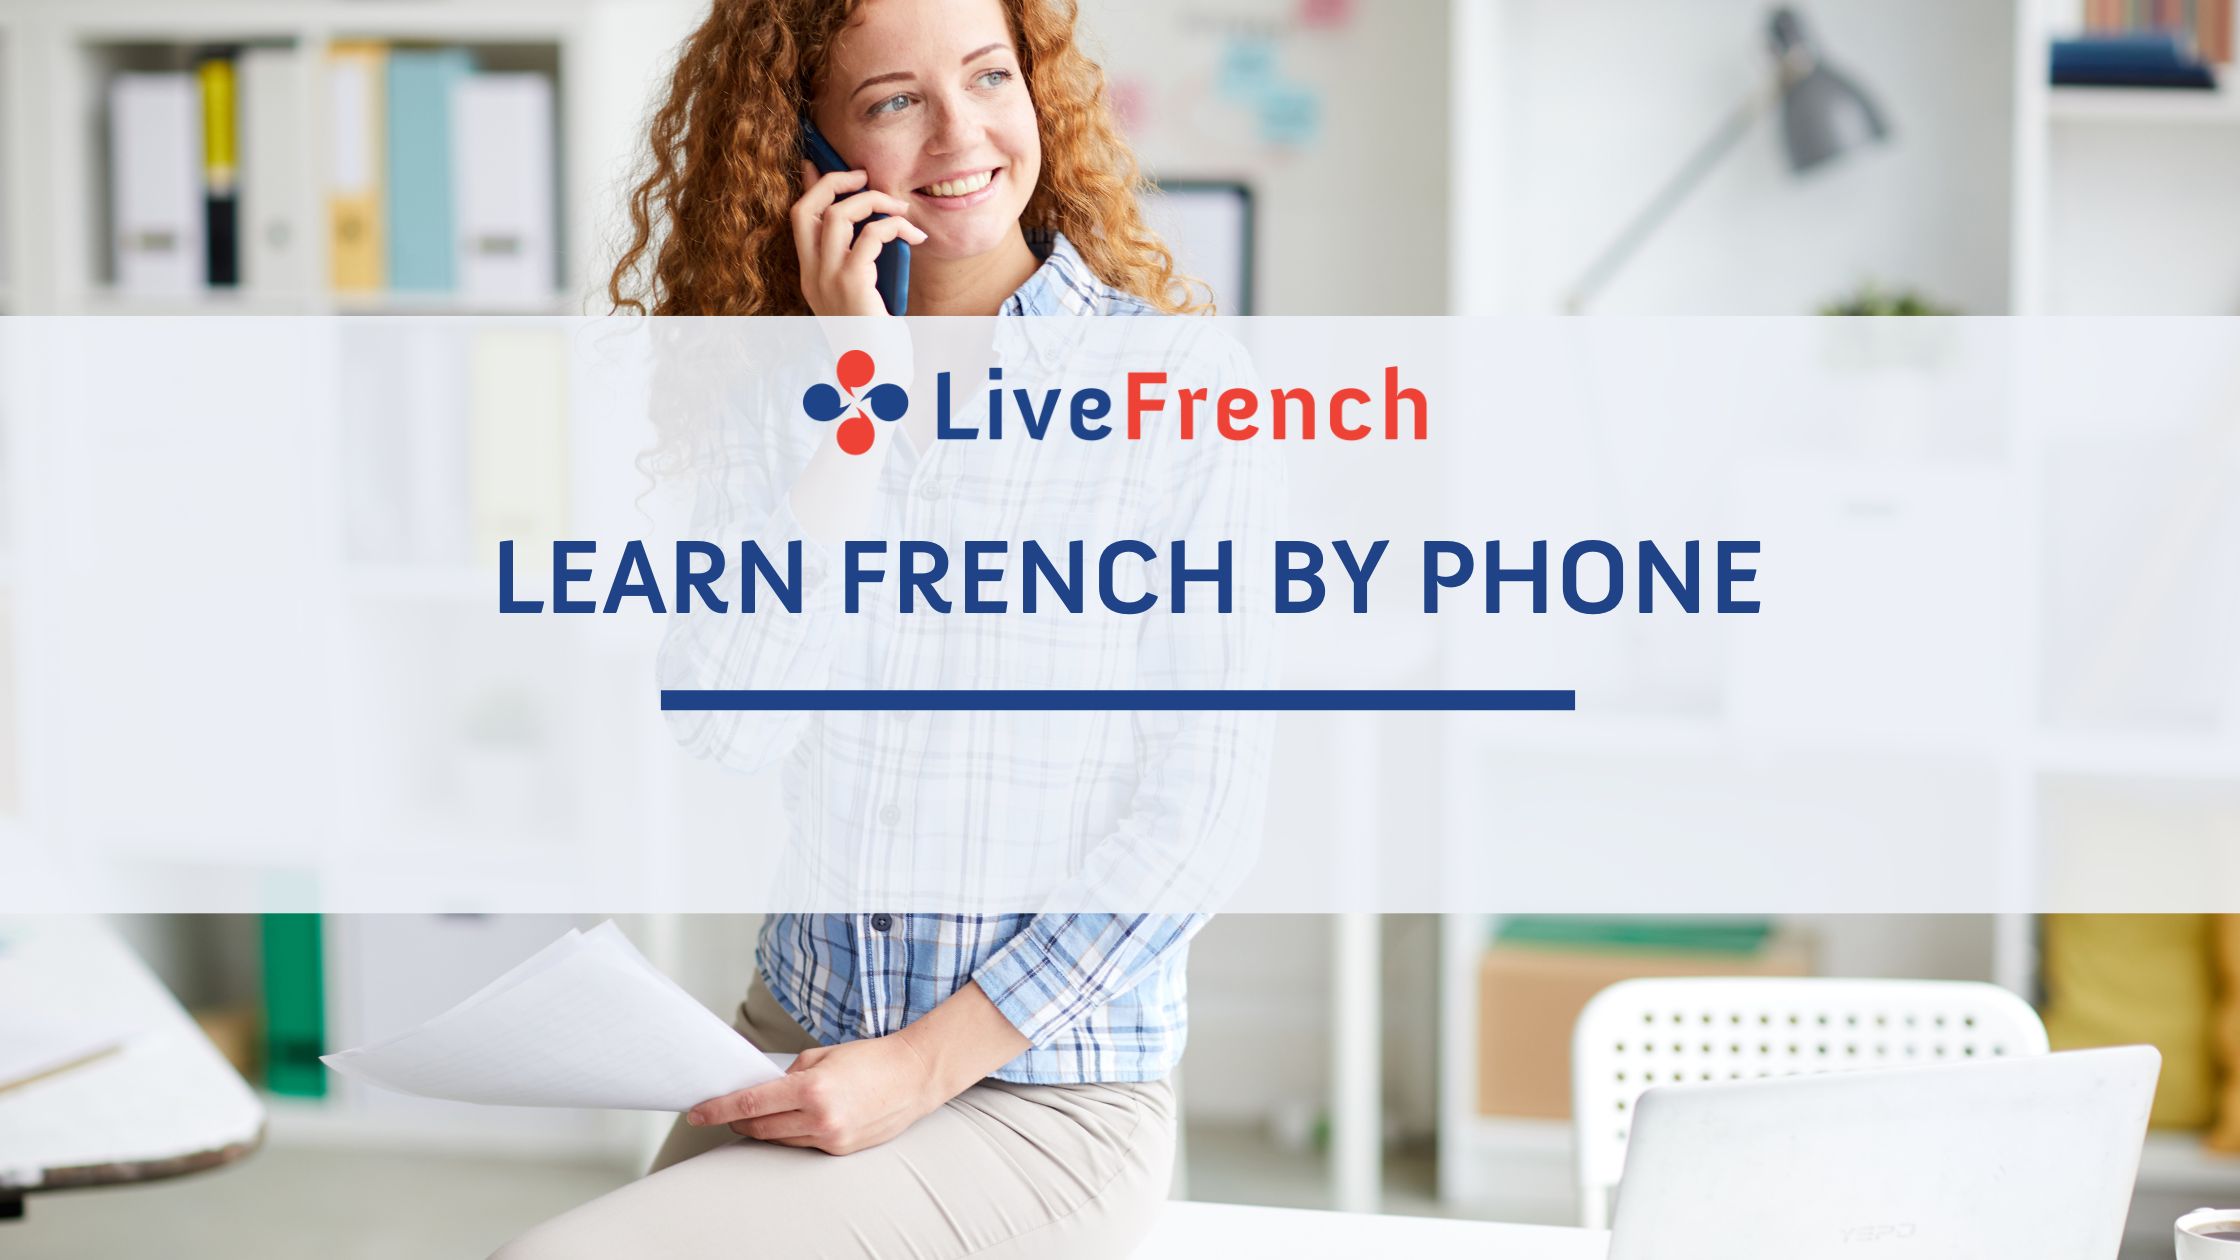 Learn French by phone